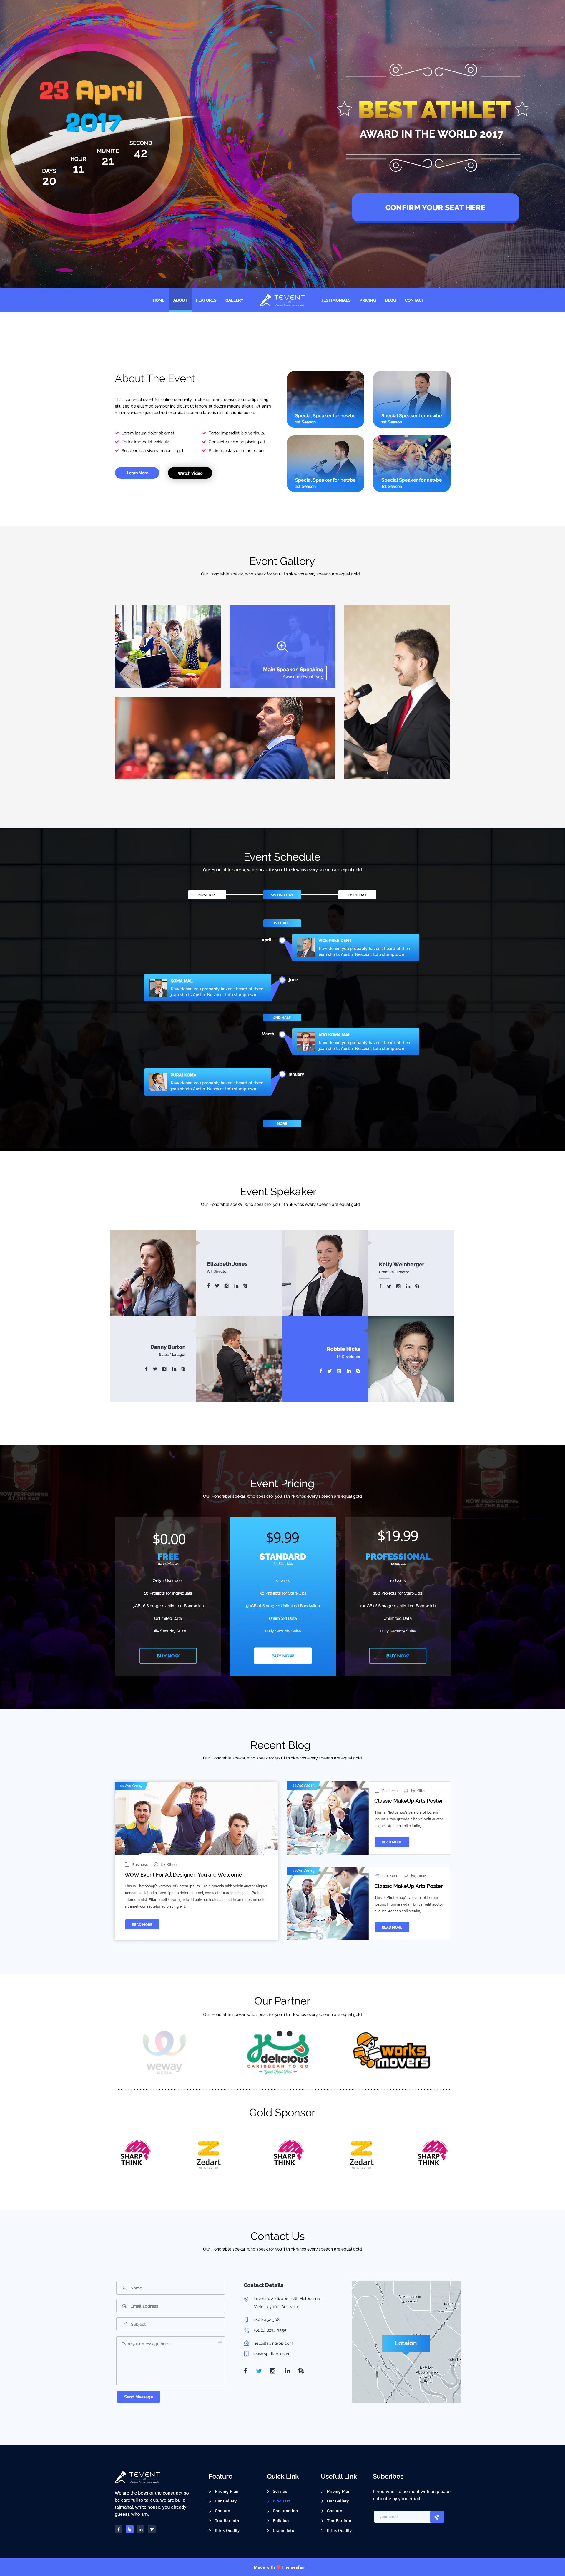 T Event - Event Conference & Meetup PSD Template